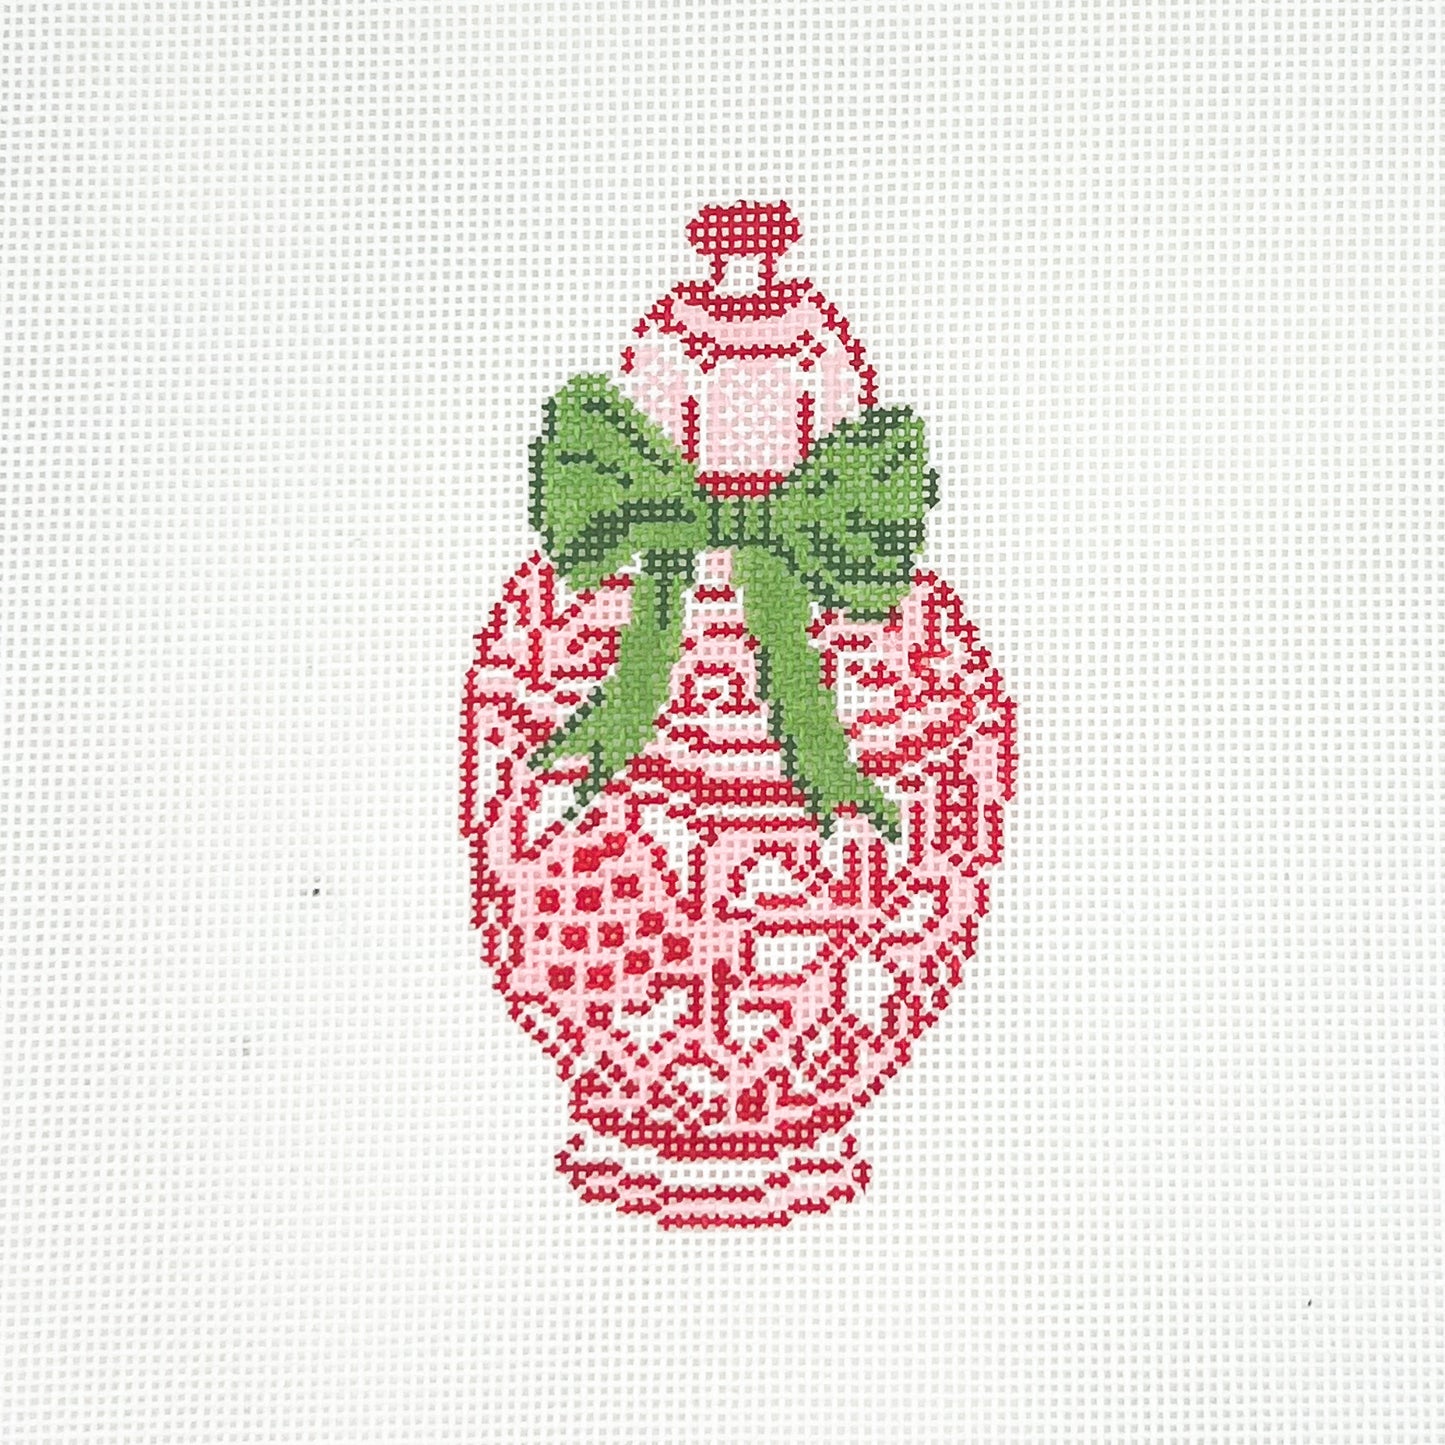 Red Ginger Jar with Green Bow